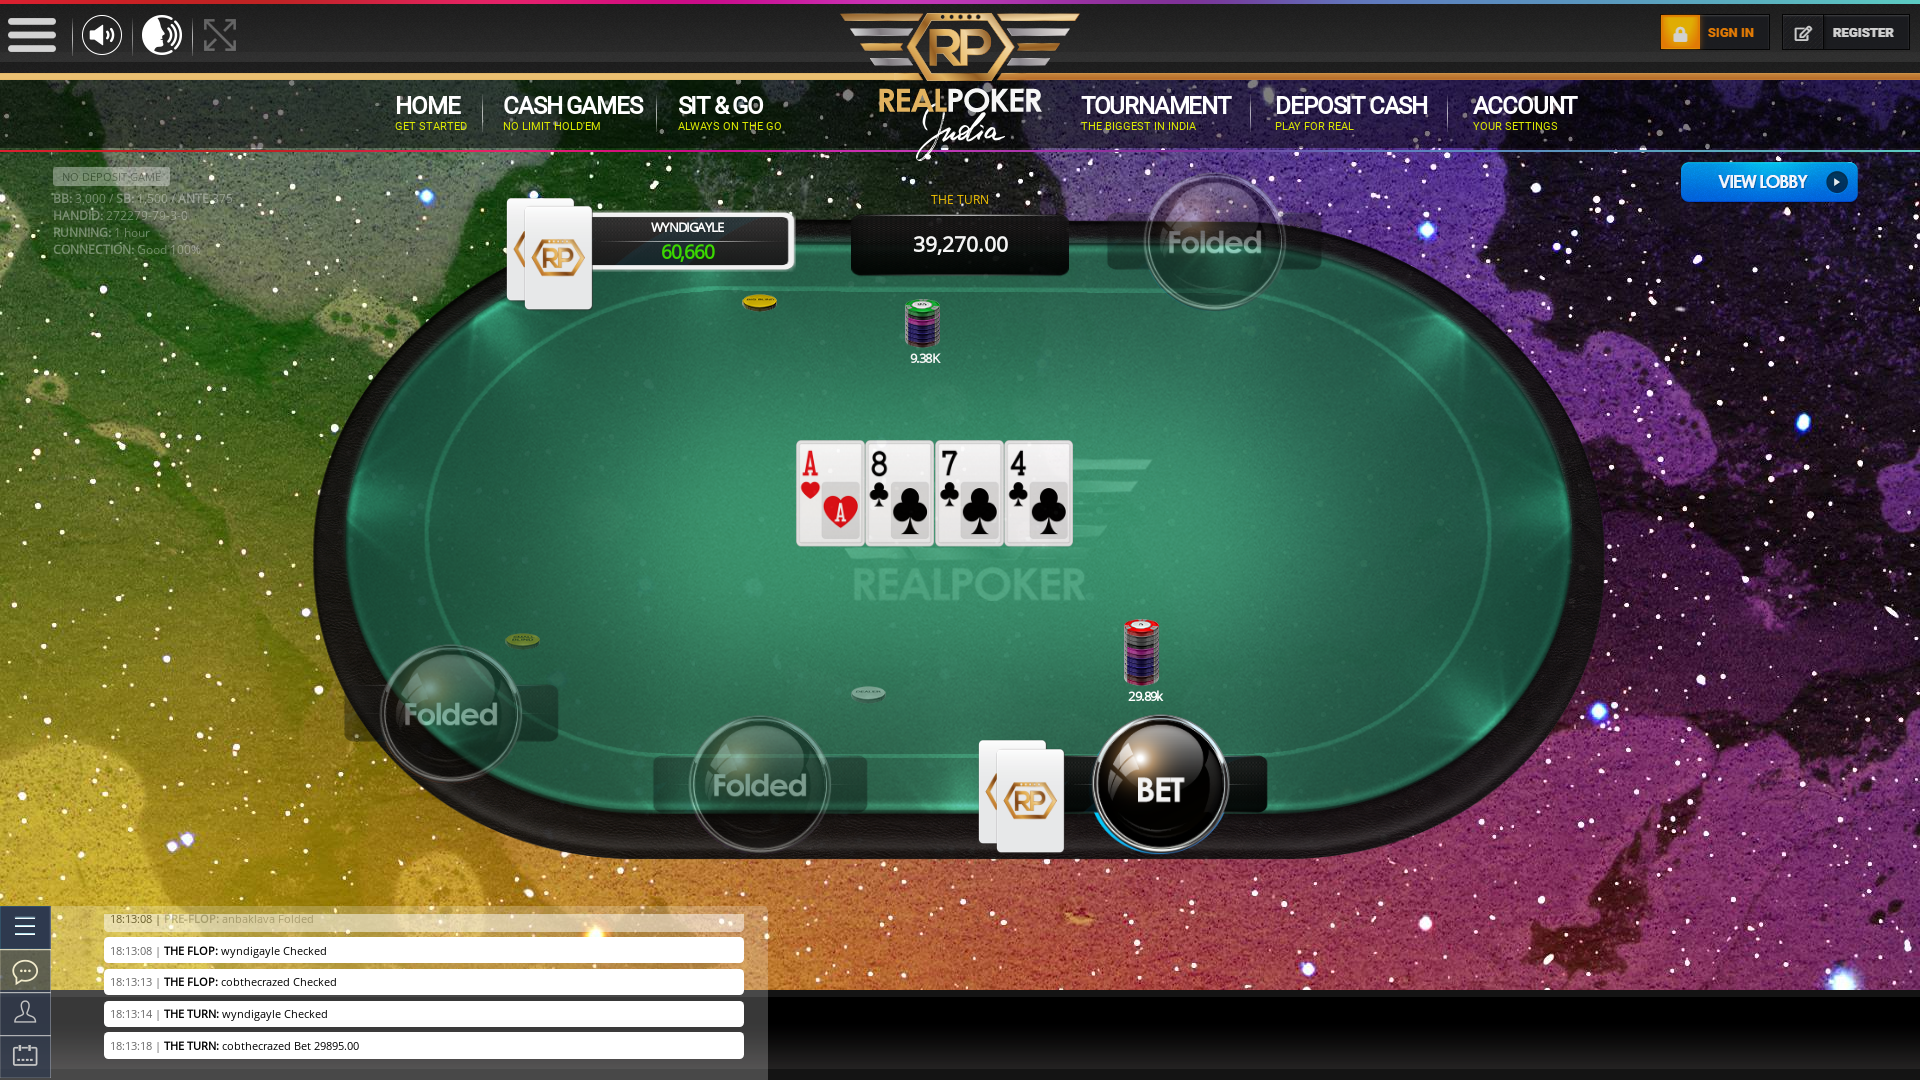 Online poker on a 10 player table in the 70th minute match up